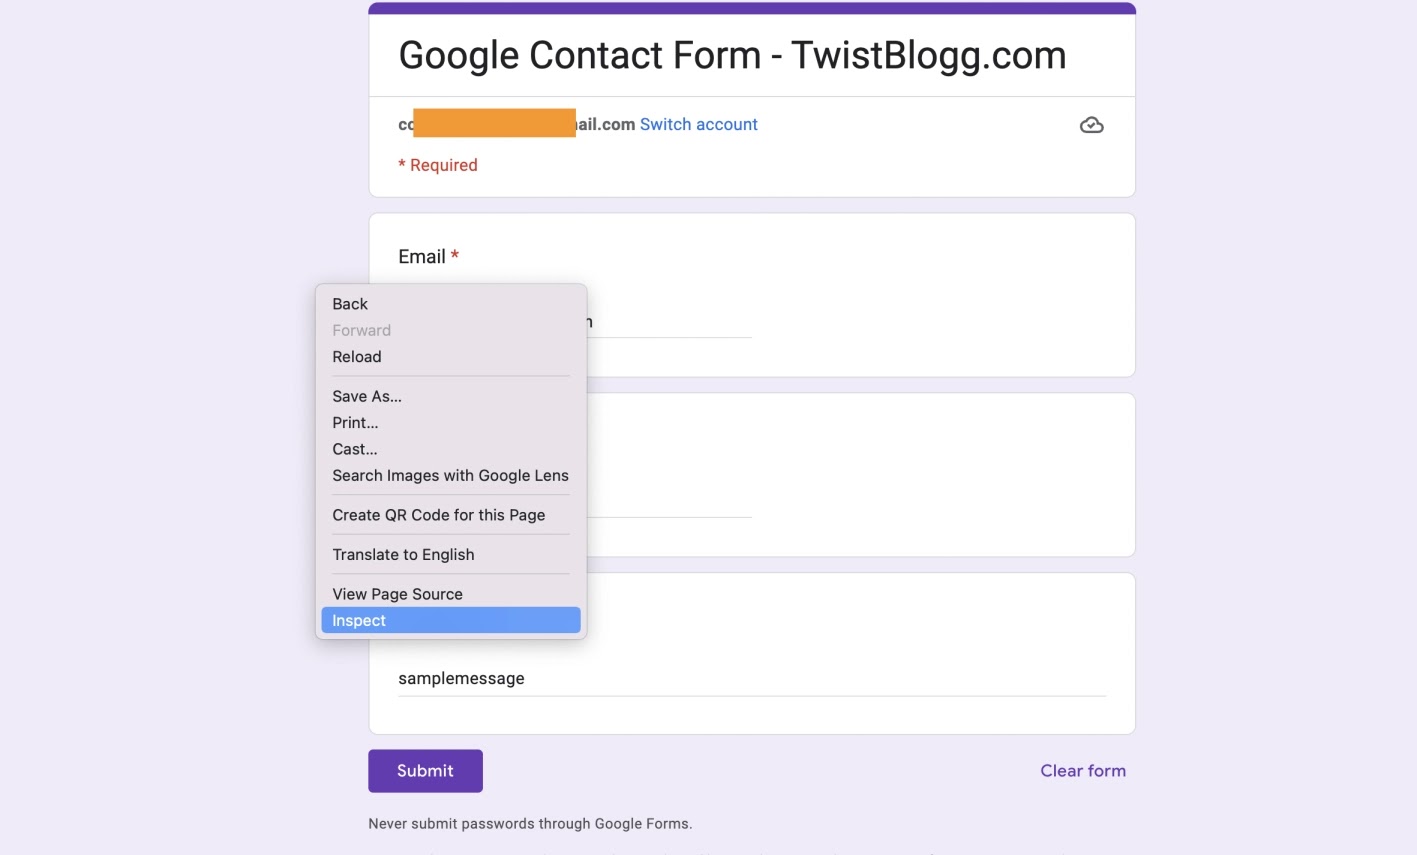 Customizing google form to use as blogger contact form